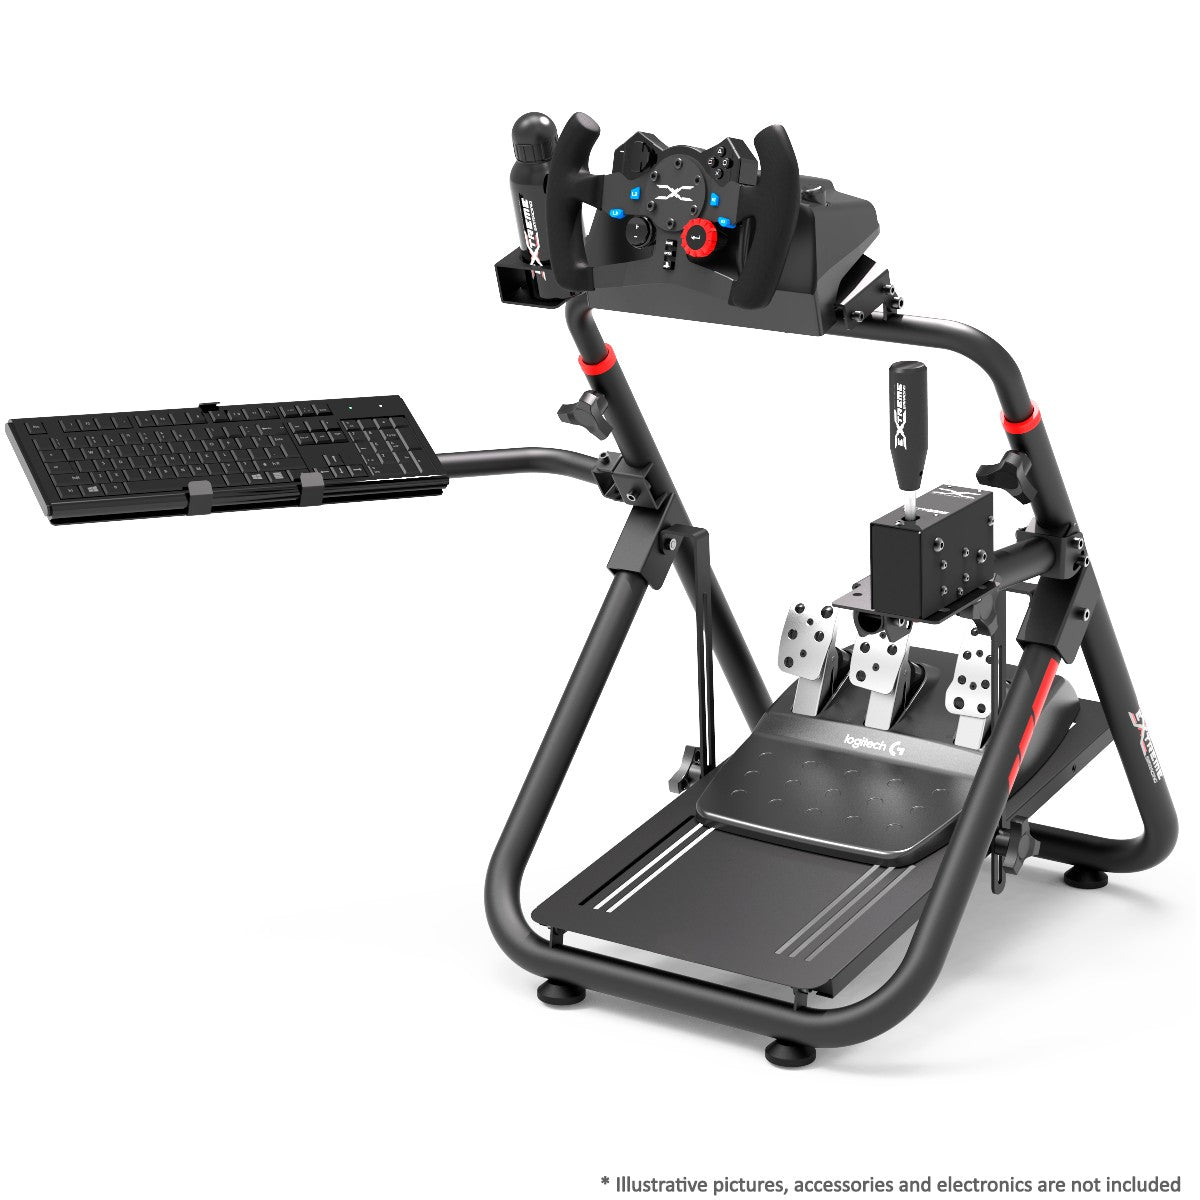  Extreme Sim Racing Wheel Stand Cockpit SGT Racing Simulator - Racing Wheel Stand Black Edition For Logitech G25, G27, G29, G920,  Thrustmaster And Fanatec - Heavy Dutty and Foldable : Video Games